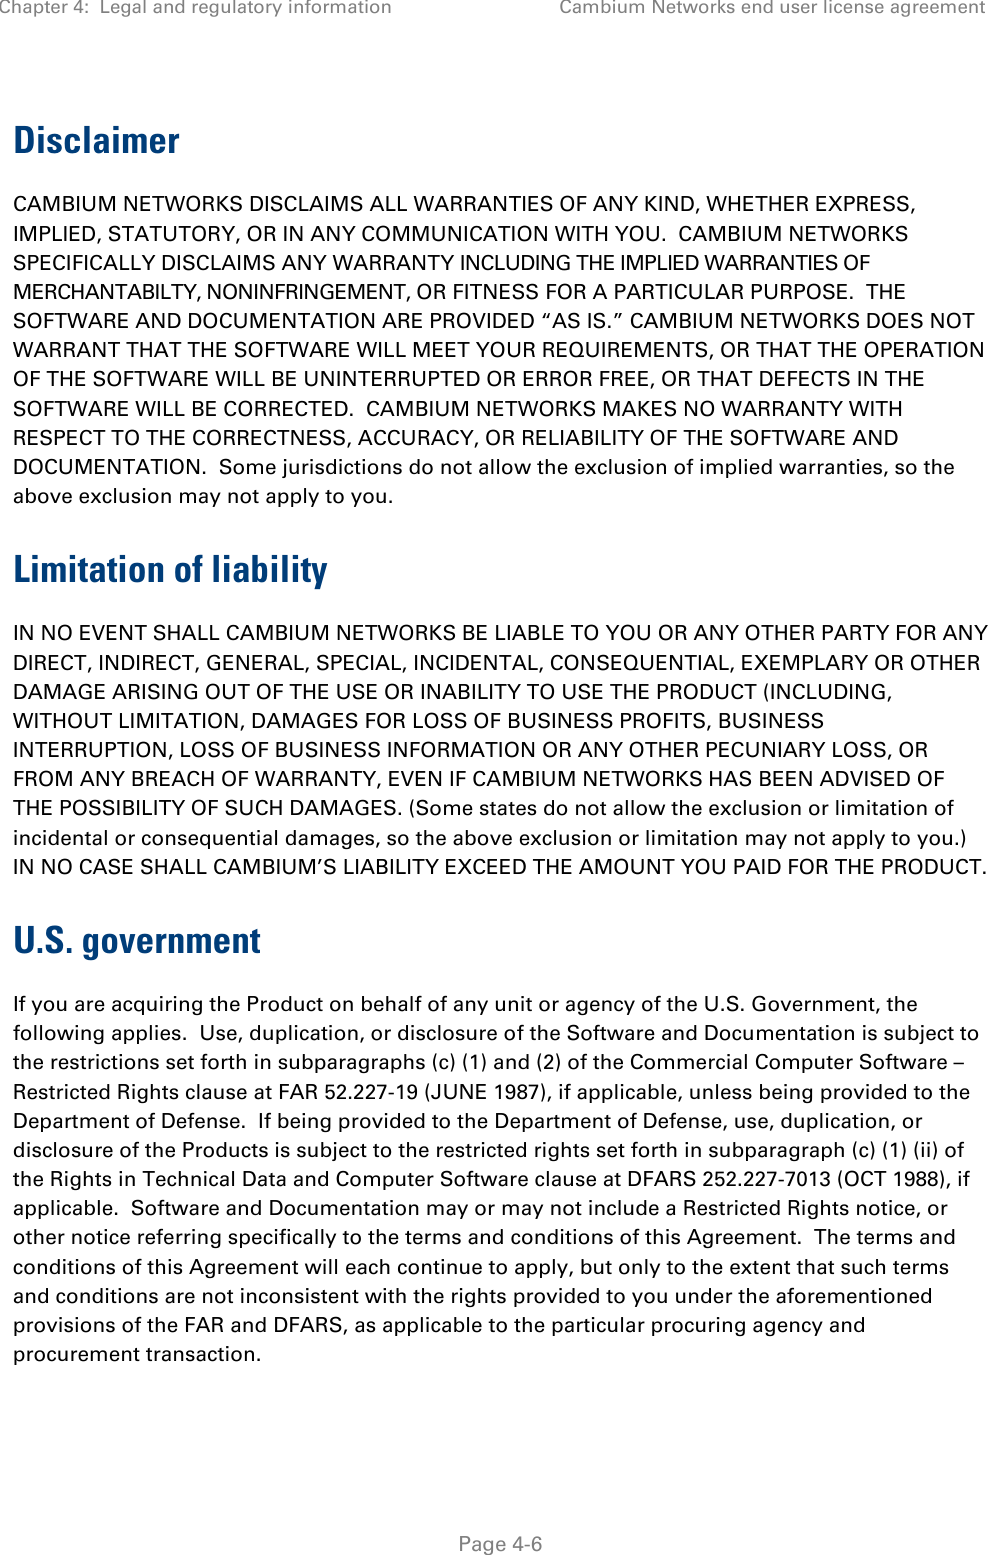 Chapter 4:  Legal and regulatory information Cambium Networks end user license agreement   Page 4-6 Disclaimer CAMBIUM NETWORKS DISCLAIMS ALL WARRANTIES OF ANY KIND, WHETHER EXPRESS, IMPLIED, STATUTORY, OR IN ANY COMMUNICATION WITH YOU.  CAMBIUM NETWORKS SPECIFICALLY DISCLAIMS ANY WARRANTY INCLUDING THE IMPLIED WARRANTIES OF MERCHANTABILTY, NONINFRINGEMENT, OR FITNESS FOR A PARTICULAR PURPOSE.  THE SOFTWARE AND DOCUMENTATION ARE PROVIDED “AS IS.” CAMBIUM NETWORKS DOES NOT WARRANT THAT THE SOFTWARE WILL MEET YOUR REQUIREMENTS, OR THAT THE OPERATION OF THE SOFTWARE WILL BE UNINTERRUPTED OR ERROR FREE, OR THAT DEFECTS IN THE SOFTWARE WILL BE CORRECTED.  CAMBIUM NETWORKS MAKES NO WARRANTY WITH RESPECT TO THE CORRECTNESS, ACCURACY, OR RELIABILITY OF THE SOFTWARE AND DOCUMENTATION.  Some jurisdictions do not allow the exclusion of implied warranties, so the above exclusion may not apply to you. Limitation of liability IN NO EVENT SHALL CAMBIUM NETWORKS BE LIABLE TO YOU OR ANY OTHER PARTY FOR ANY DIRECT, INDIRECT, GENERAL, SPECIAL, INCIDENTAL, CONSEQUENTIAL, EXEMPLARY OR OTHER DAMAGE ARISING OUT OF THE USE OR INABILITY TO USE THE PRODUCT (INCLUDING, WITHOUT LIMITATION, DAMAGES FOR LOSS OF BUSINESS PROFITS, BUSINESS INTERRUPTION, LOSS OF BUSINESS INFORMATION OR ANY OTHER PECUNIARY LOSS, OR FROM ANY BREACH OF WARRANTY, EVEN IF CAMBIUM NETWORKS HAS BEEN ADVISED OF THE POSSIBILITY OF SUCH DAMAGES. (Some states do not allow the exclusion or limitation of incidental or consequential damages, so the above exclusion or limitation may not apply to you.) IN NO CASE SHALL CAMBIUM’S LIABILITY EXCEED THE AMOUNT YOU PAID FOR THE PRODUCT. U.S. government If you are acquiring the Product on behalf of any unit or agency of the U.S. Government, the following applies.  Use, duplication, or disclosure of the Software and Documentation is subject to the restrictions set forth in subparagraphs (c) (1) and (2) of the Commercial Computer Software – Restricted Rights clause at FAR 52.227-19 (JUNE 1987), if applicable, unless being provided to the Department of Defense.  If being provided to the Department of Defense, use, duplication, or disclosure of the Products is subject to the restricted rights set forth in subparagraph (c) (1) (ii) of the Rights in Technical Data and Computer Software clause at DFARS 252.227-7013 (OCT 1988), if applicable.  Software and Documentation may or may not include a Restricted Rights notice, or other notice referring specifically to the terms and conditions of this Agreement.  The terms and conditions of this Agreement will each continue to apply, but only to the extent that such terms and conditions are not inconsistent with the rights provided to you under the aforementioned provisions of the FAR and DFARS, as applicable to the particular procuring agency and procurement transaction. 